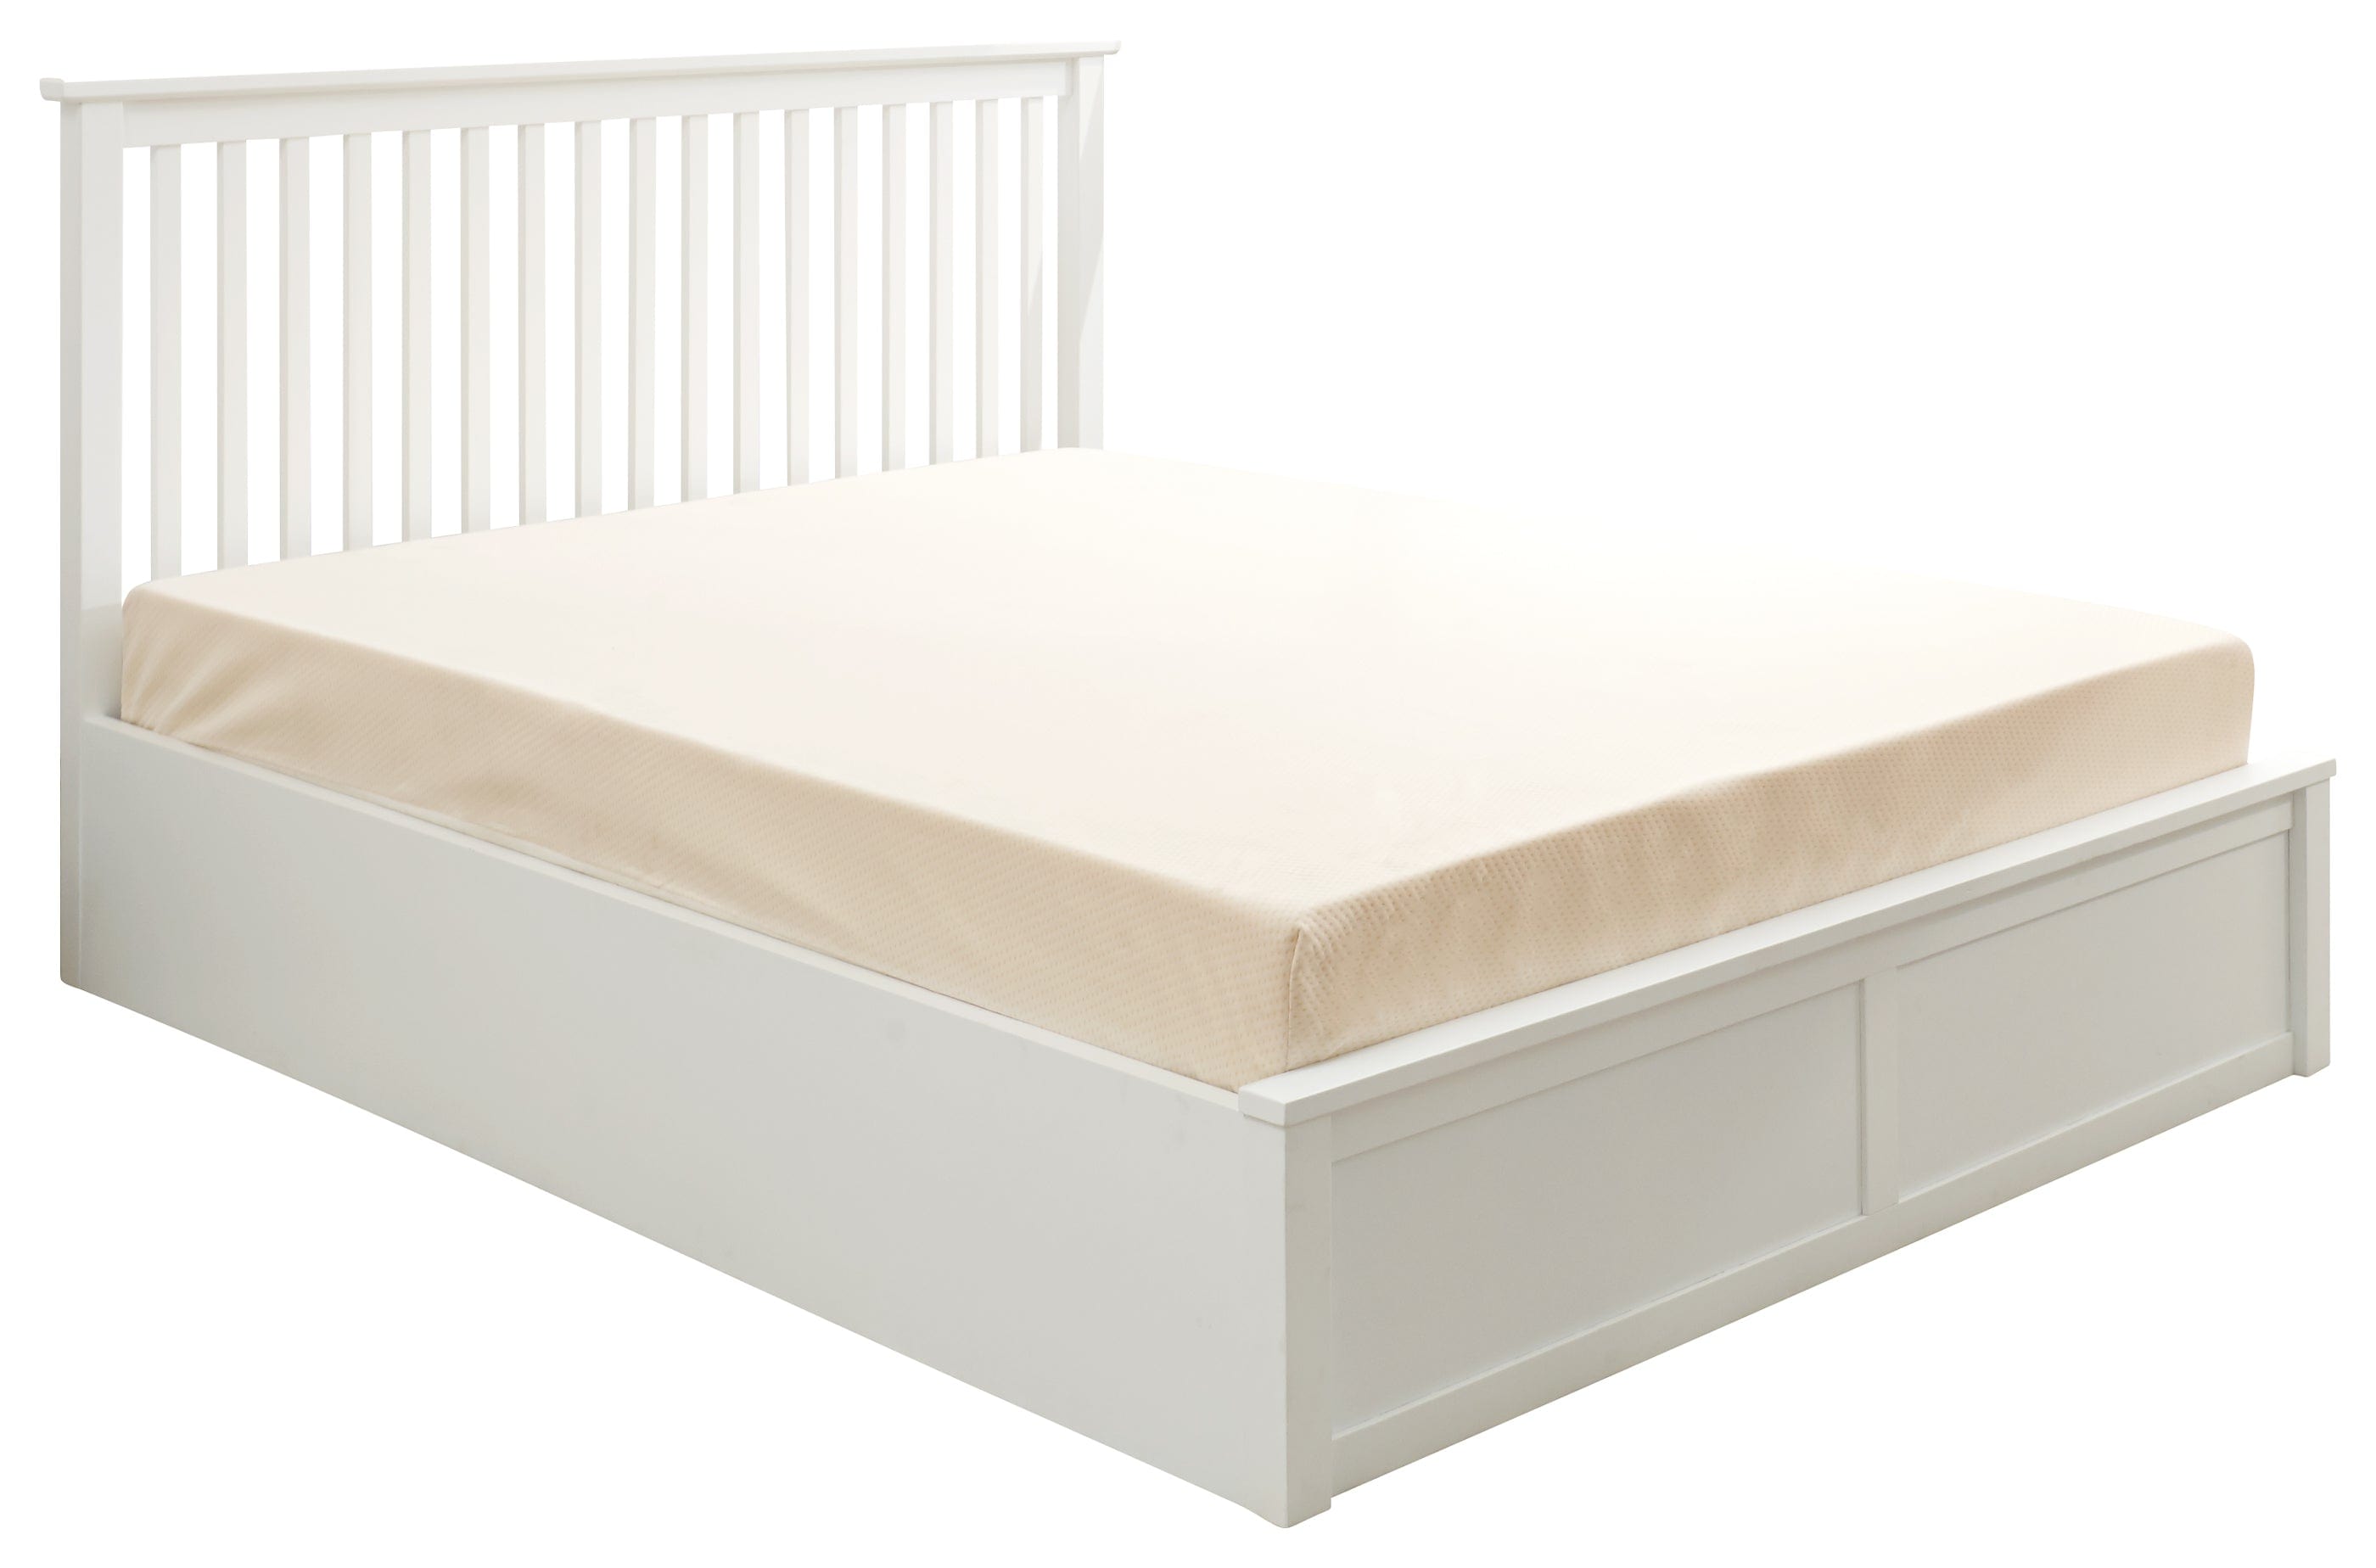 Image of CLEARANCE Como Wooden Ottoman Bed White - Double 4'6"